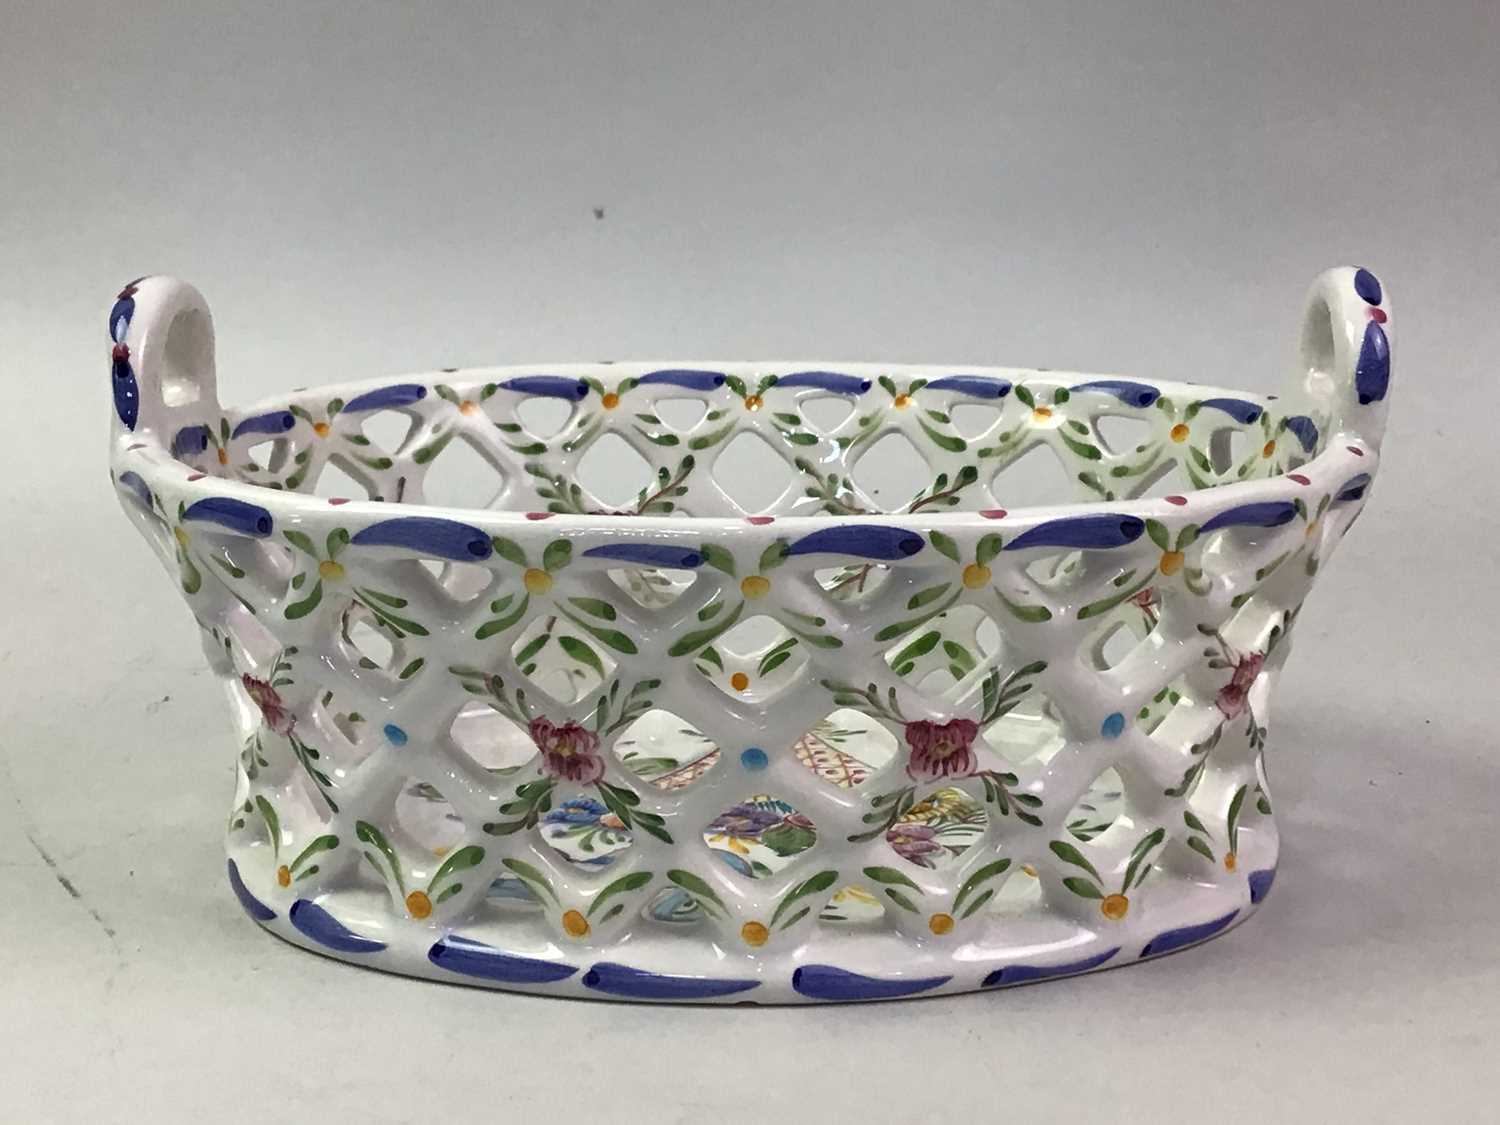 ITALIAN MAJOLICA COMPORT, ALONG WITH A MURANO GLASS DISH AND CERAMIC BASKET - Image 3 of 3